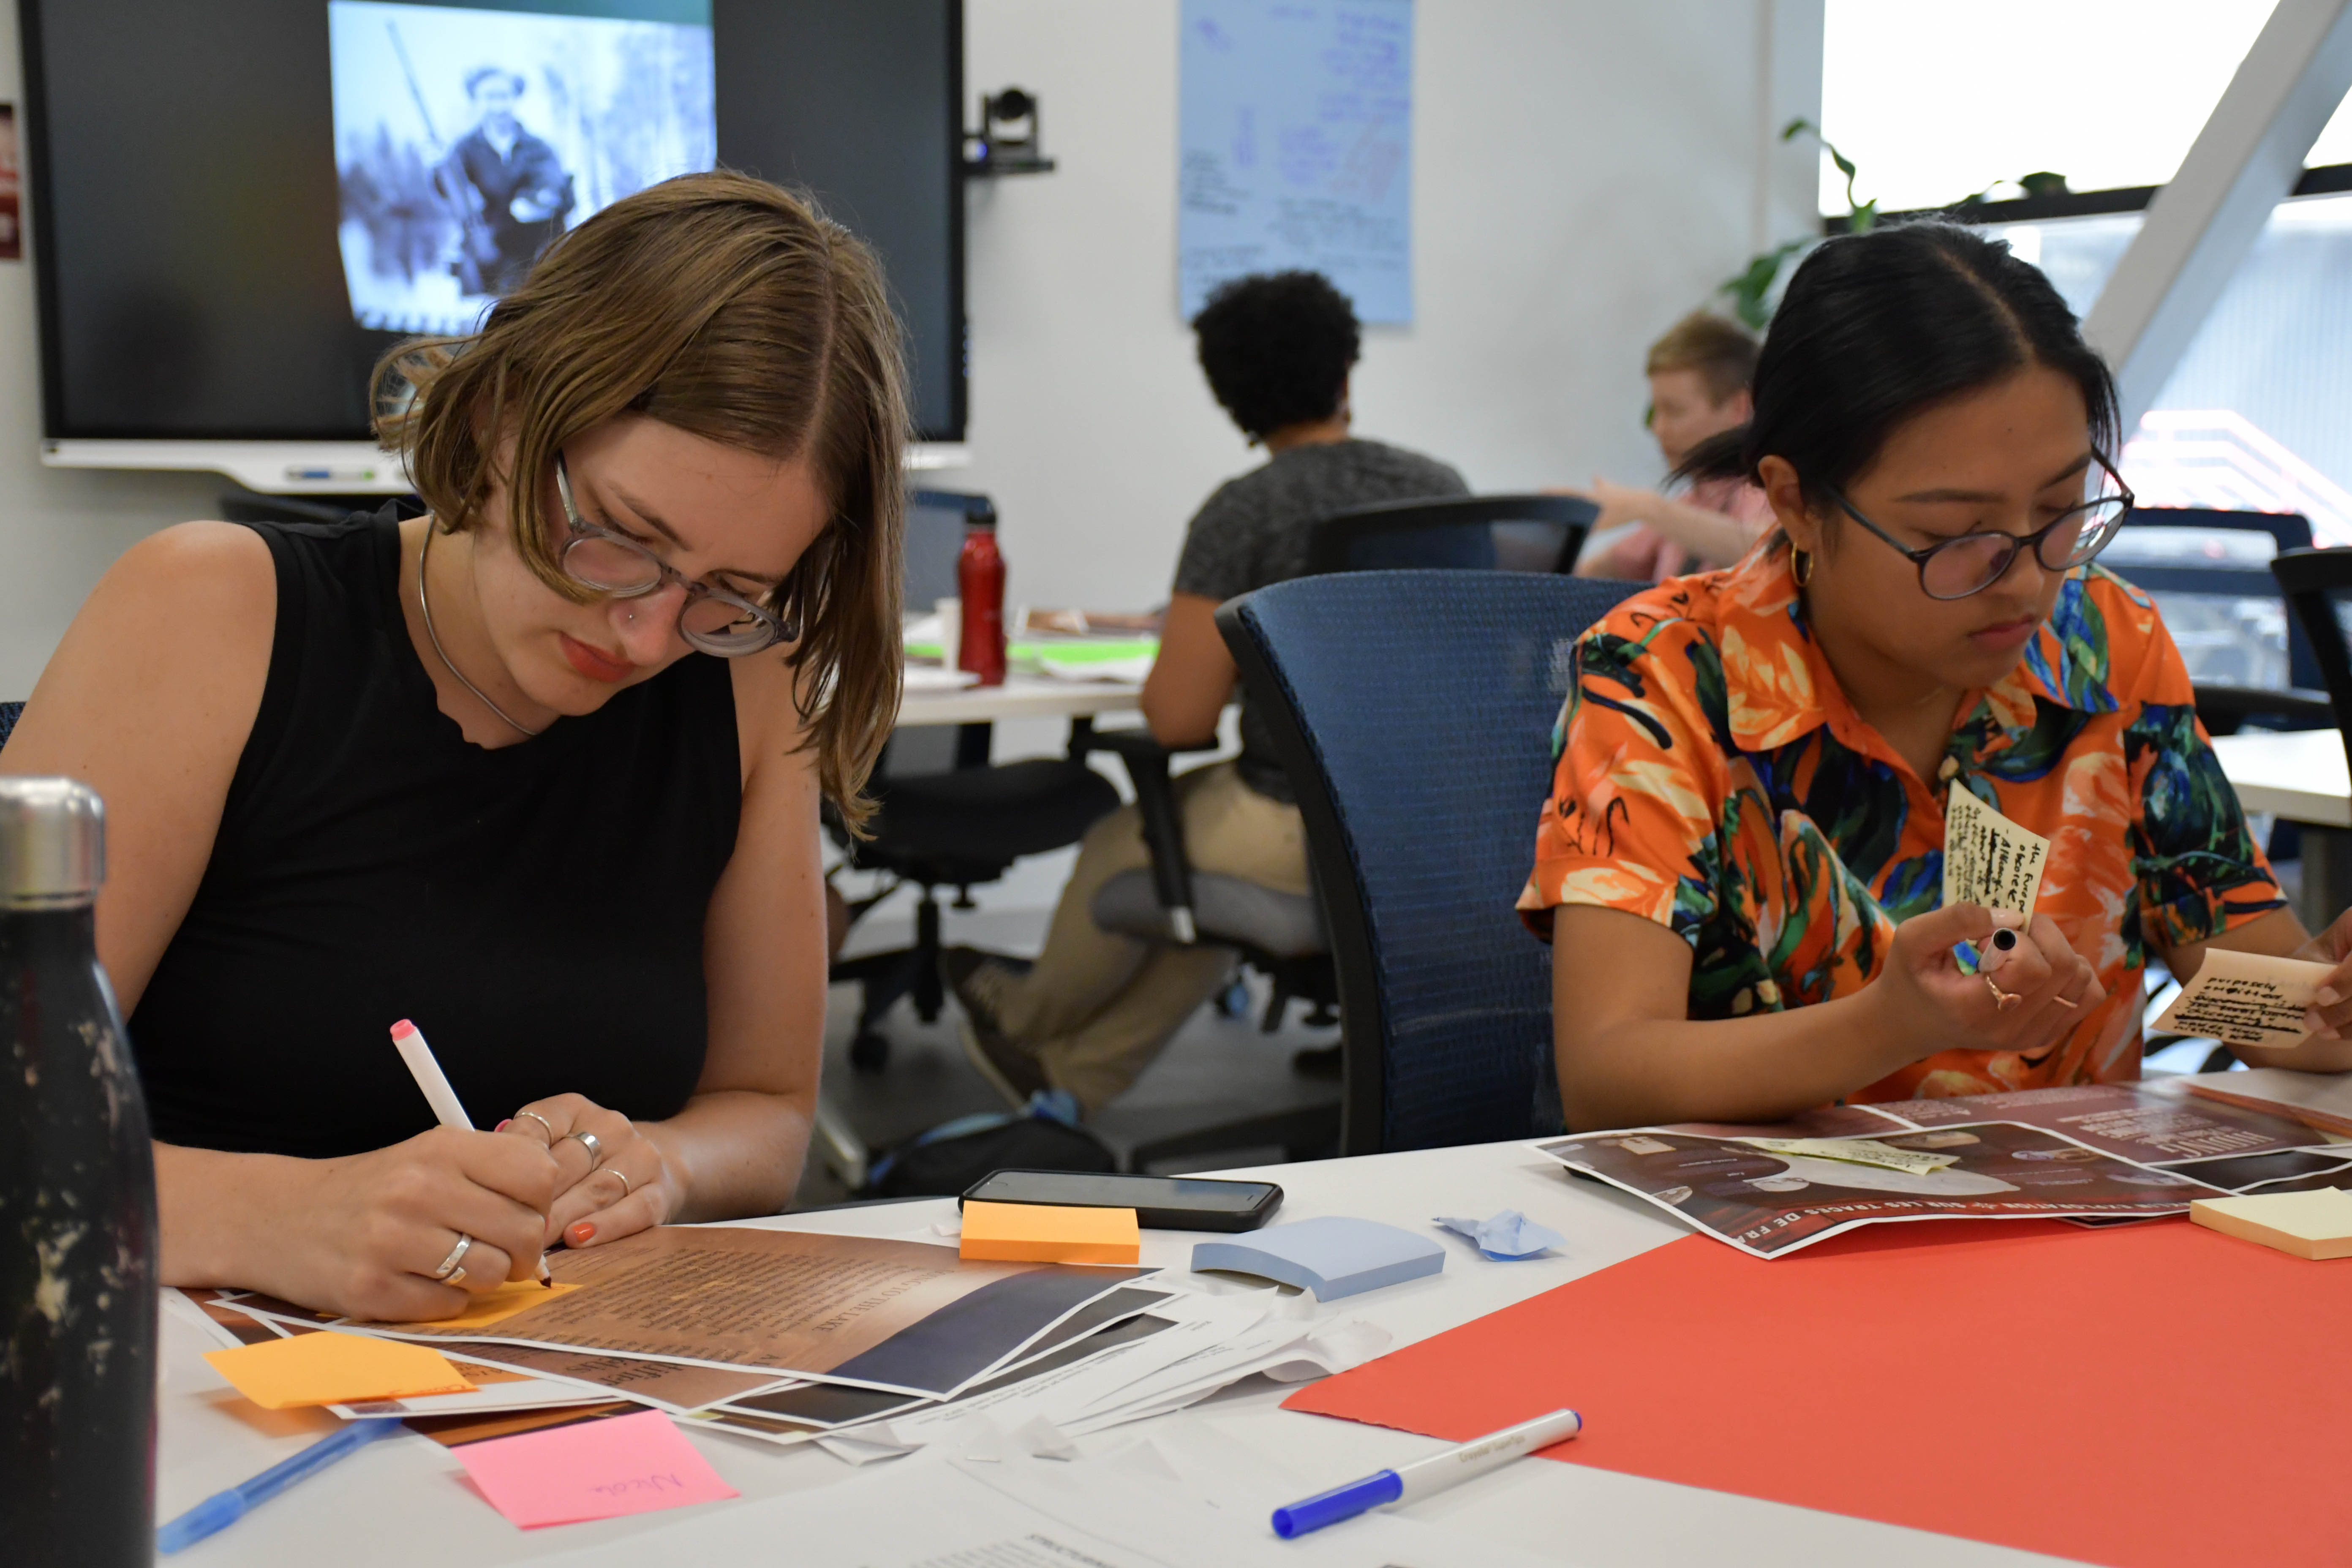 Research associate Nicole Ritchie (left) and research assistant Mika Castro working on their imagined exhibits.